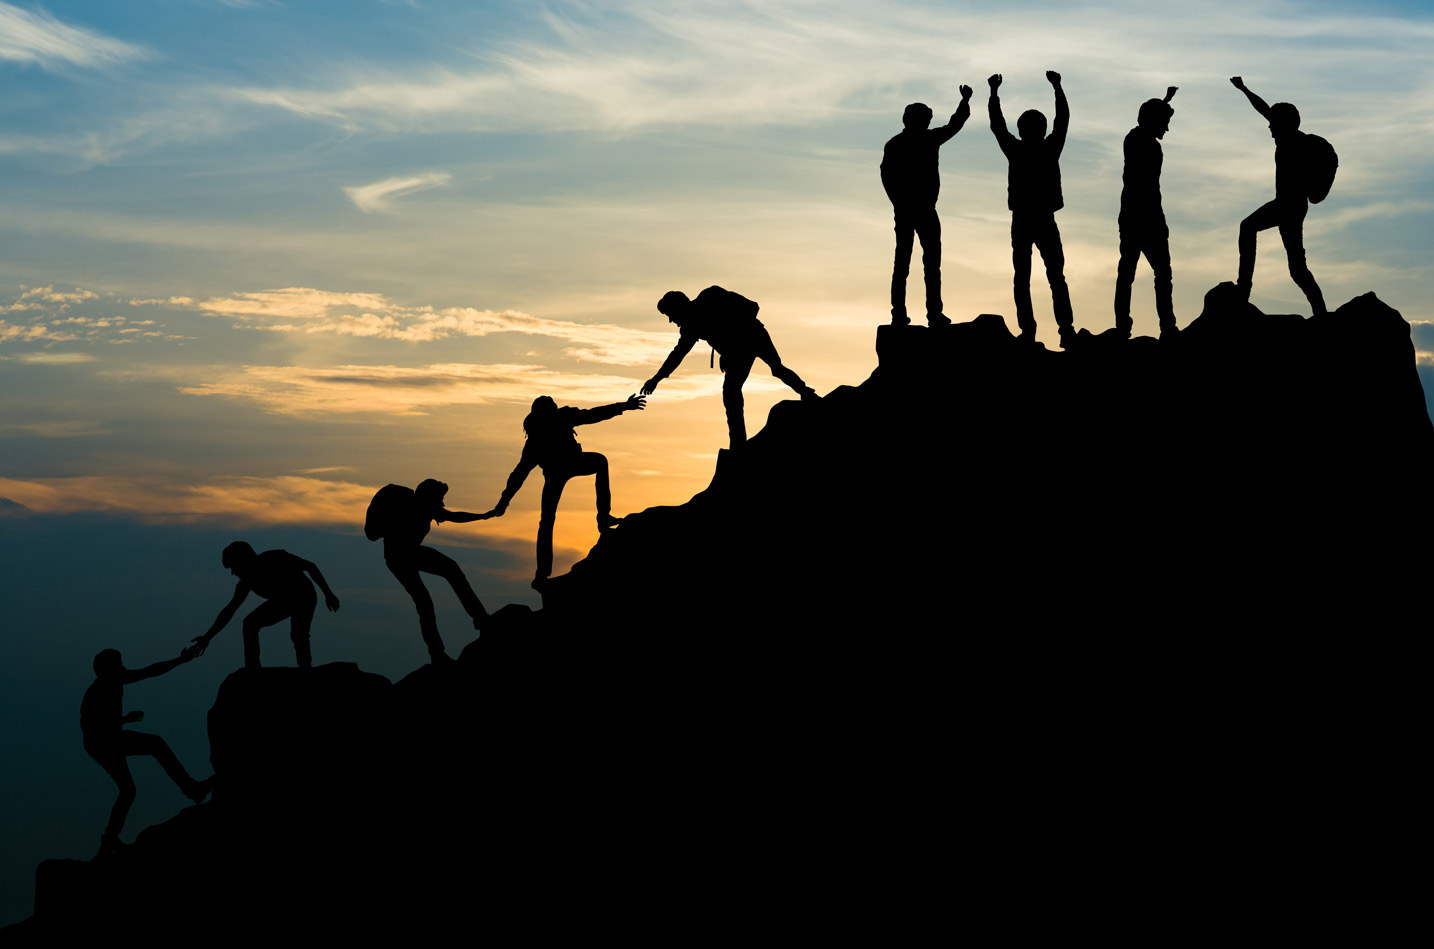 A silhouette of a group of people leading and helping each other climb a mountain as the sun sets.